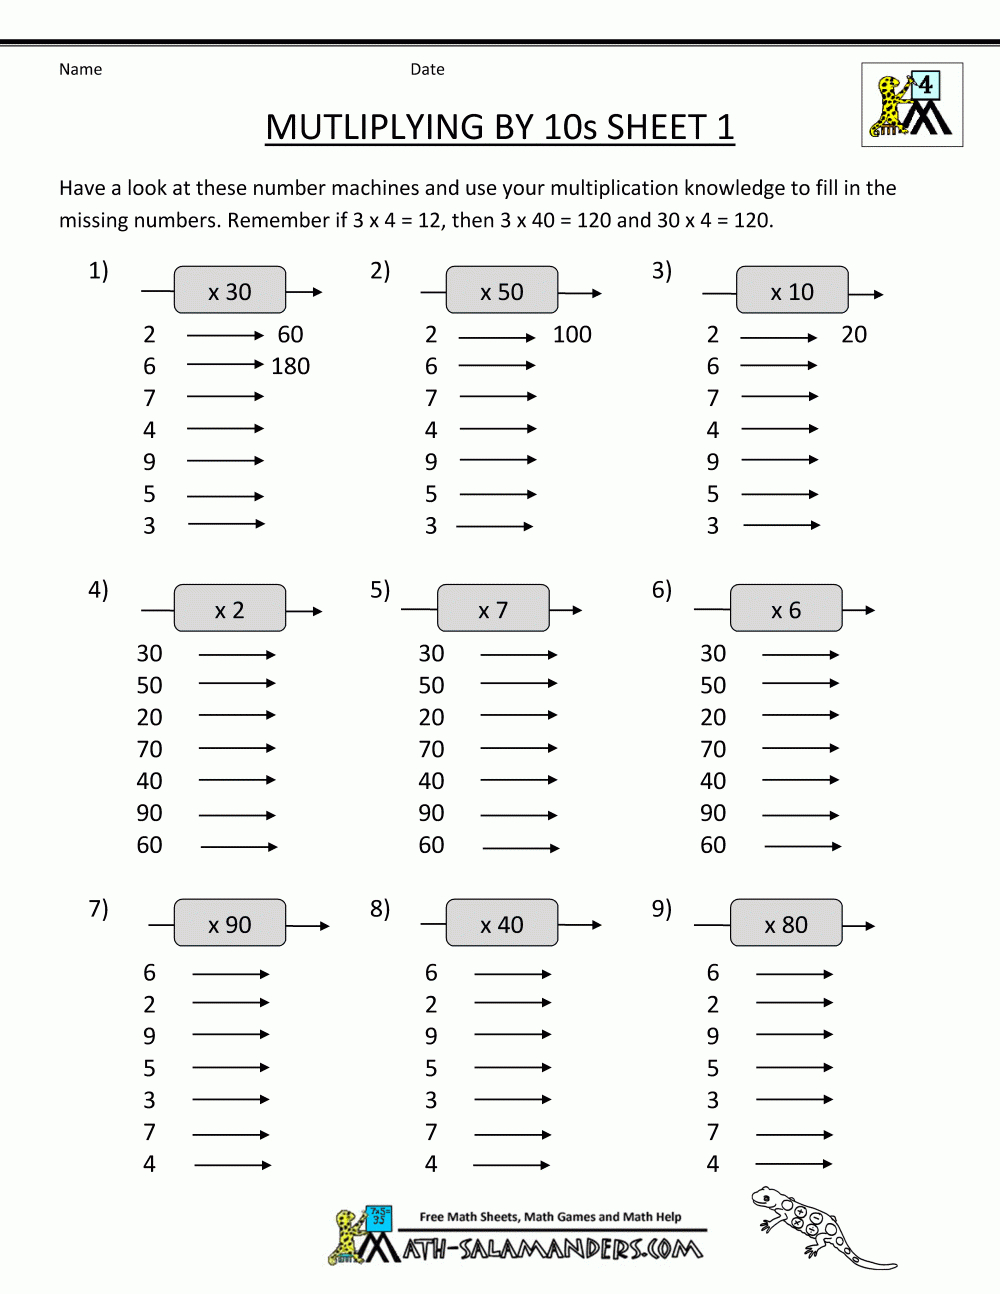 Multiplication Fact Sheets - Free Printable Multiplication Worksheets For 4Th Grade